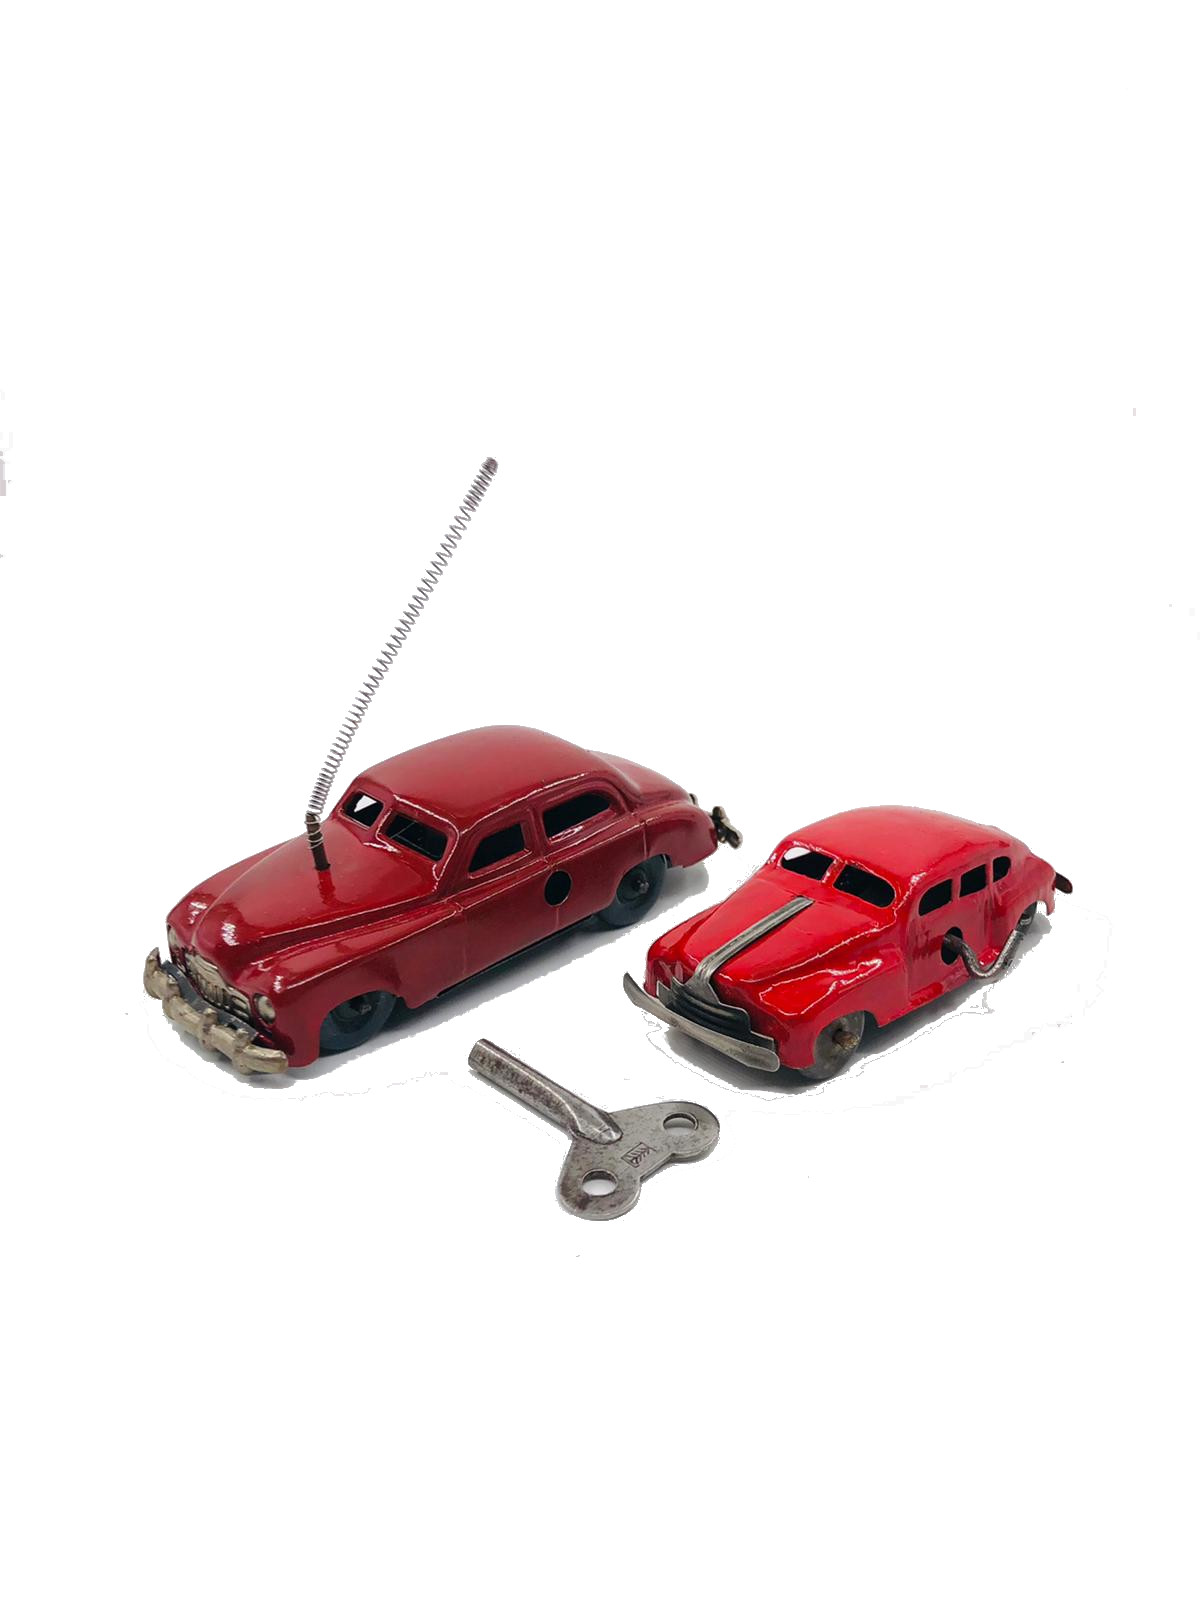 Tin wind up red collectable cars